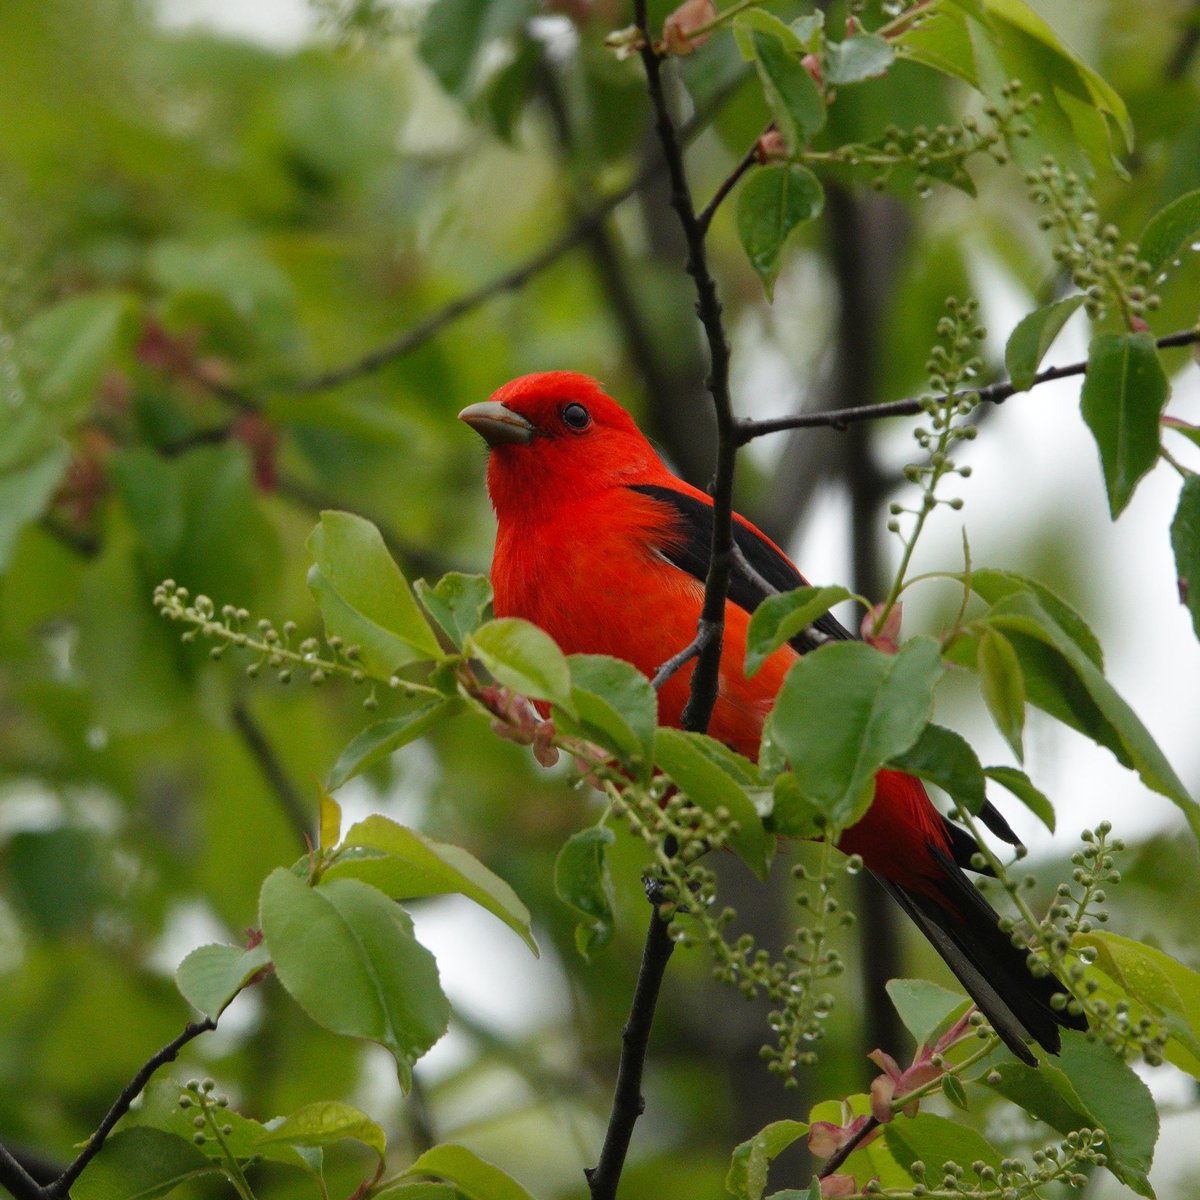 Another breathtaking Scarlet Tanager. Soon these brilliant gemstones of the trees will have moved on or will much harder to see. #scarlettanager #tanager #birding #songbirds #springmigration #natgeo #birdcp #birdcpp #birds #birdphotos #nature #natgeowild #urbanbirding #nyc